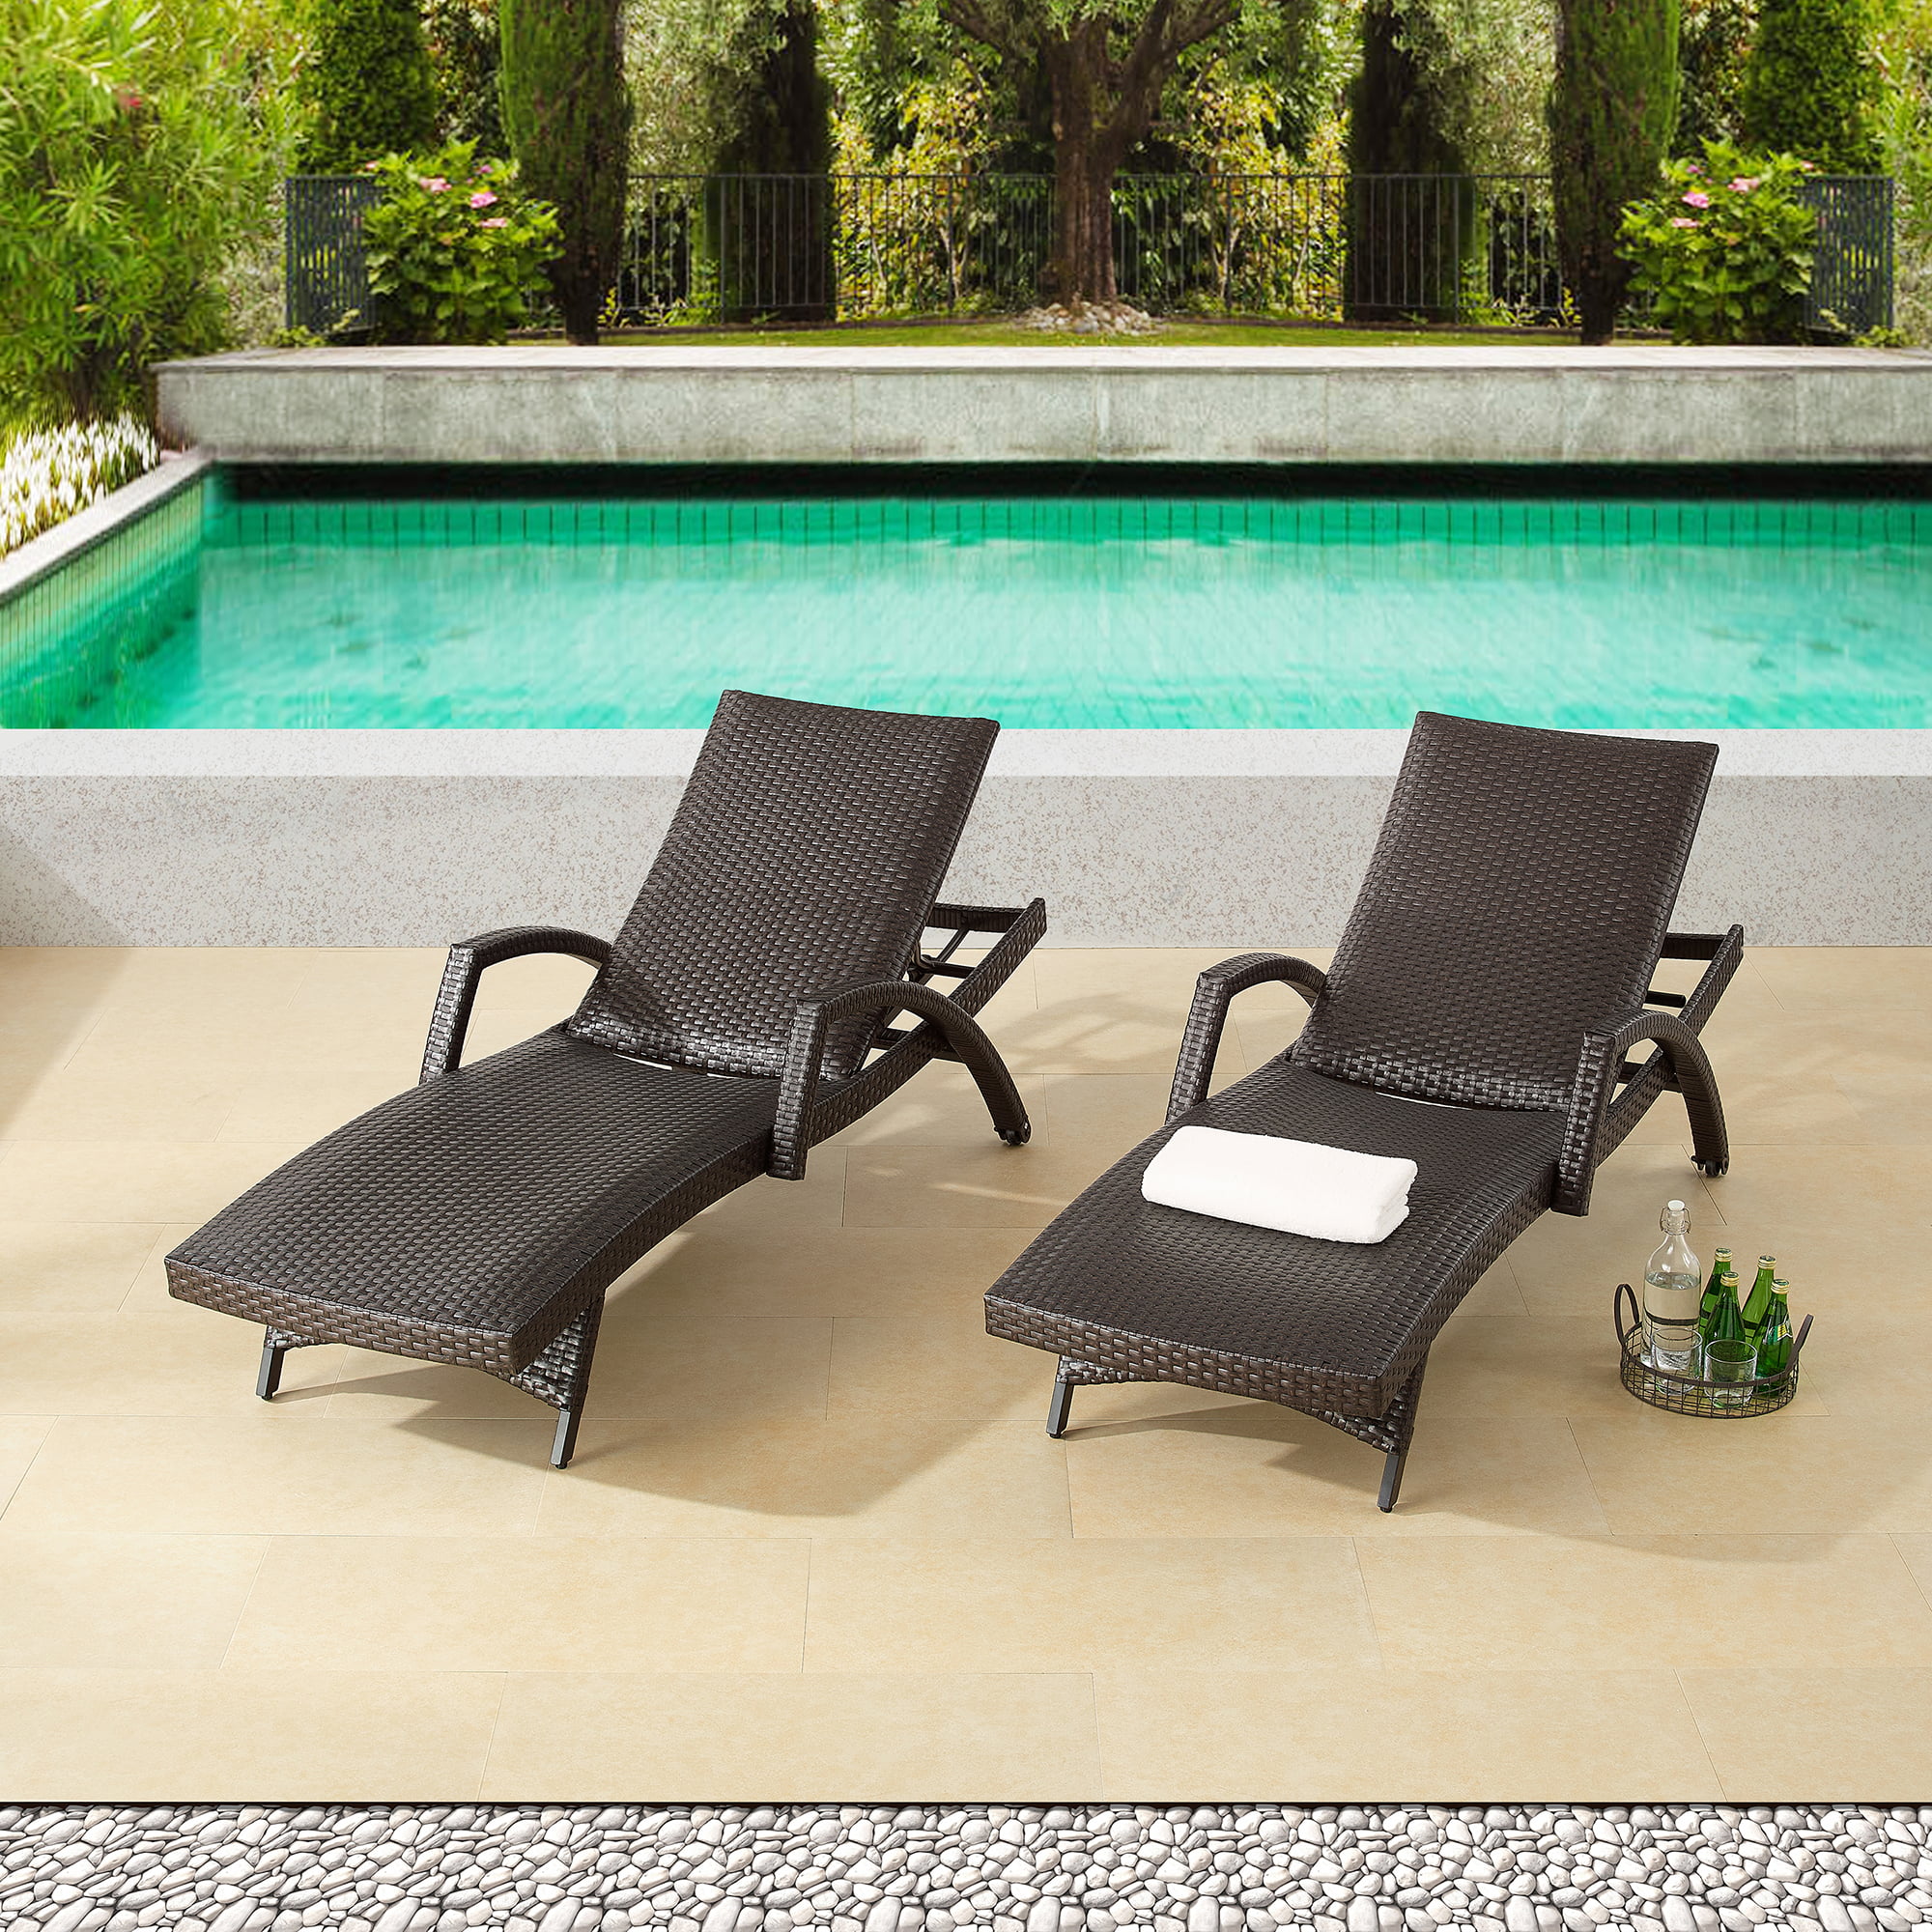 Ulax Furniture Outdoor Woven Padded 2-Pieces Aluminum Chaise Lounge Chairs  Patio Armed Lounger Adjustable Chair with Wheels and Quick Dry Foam